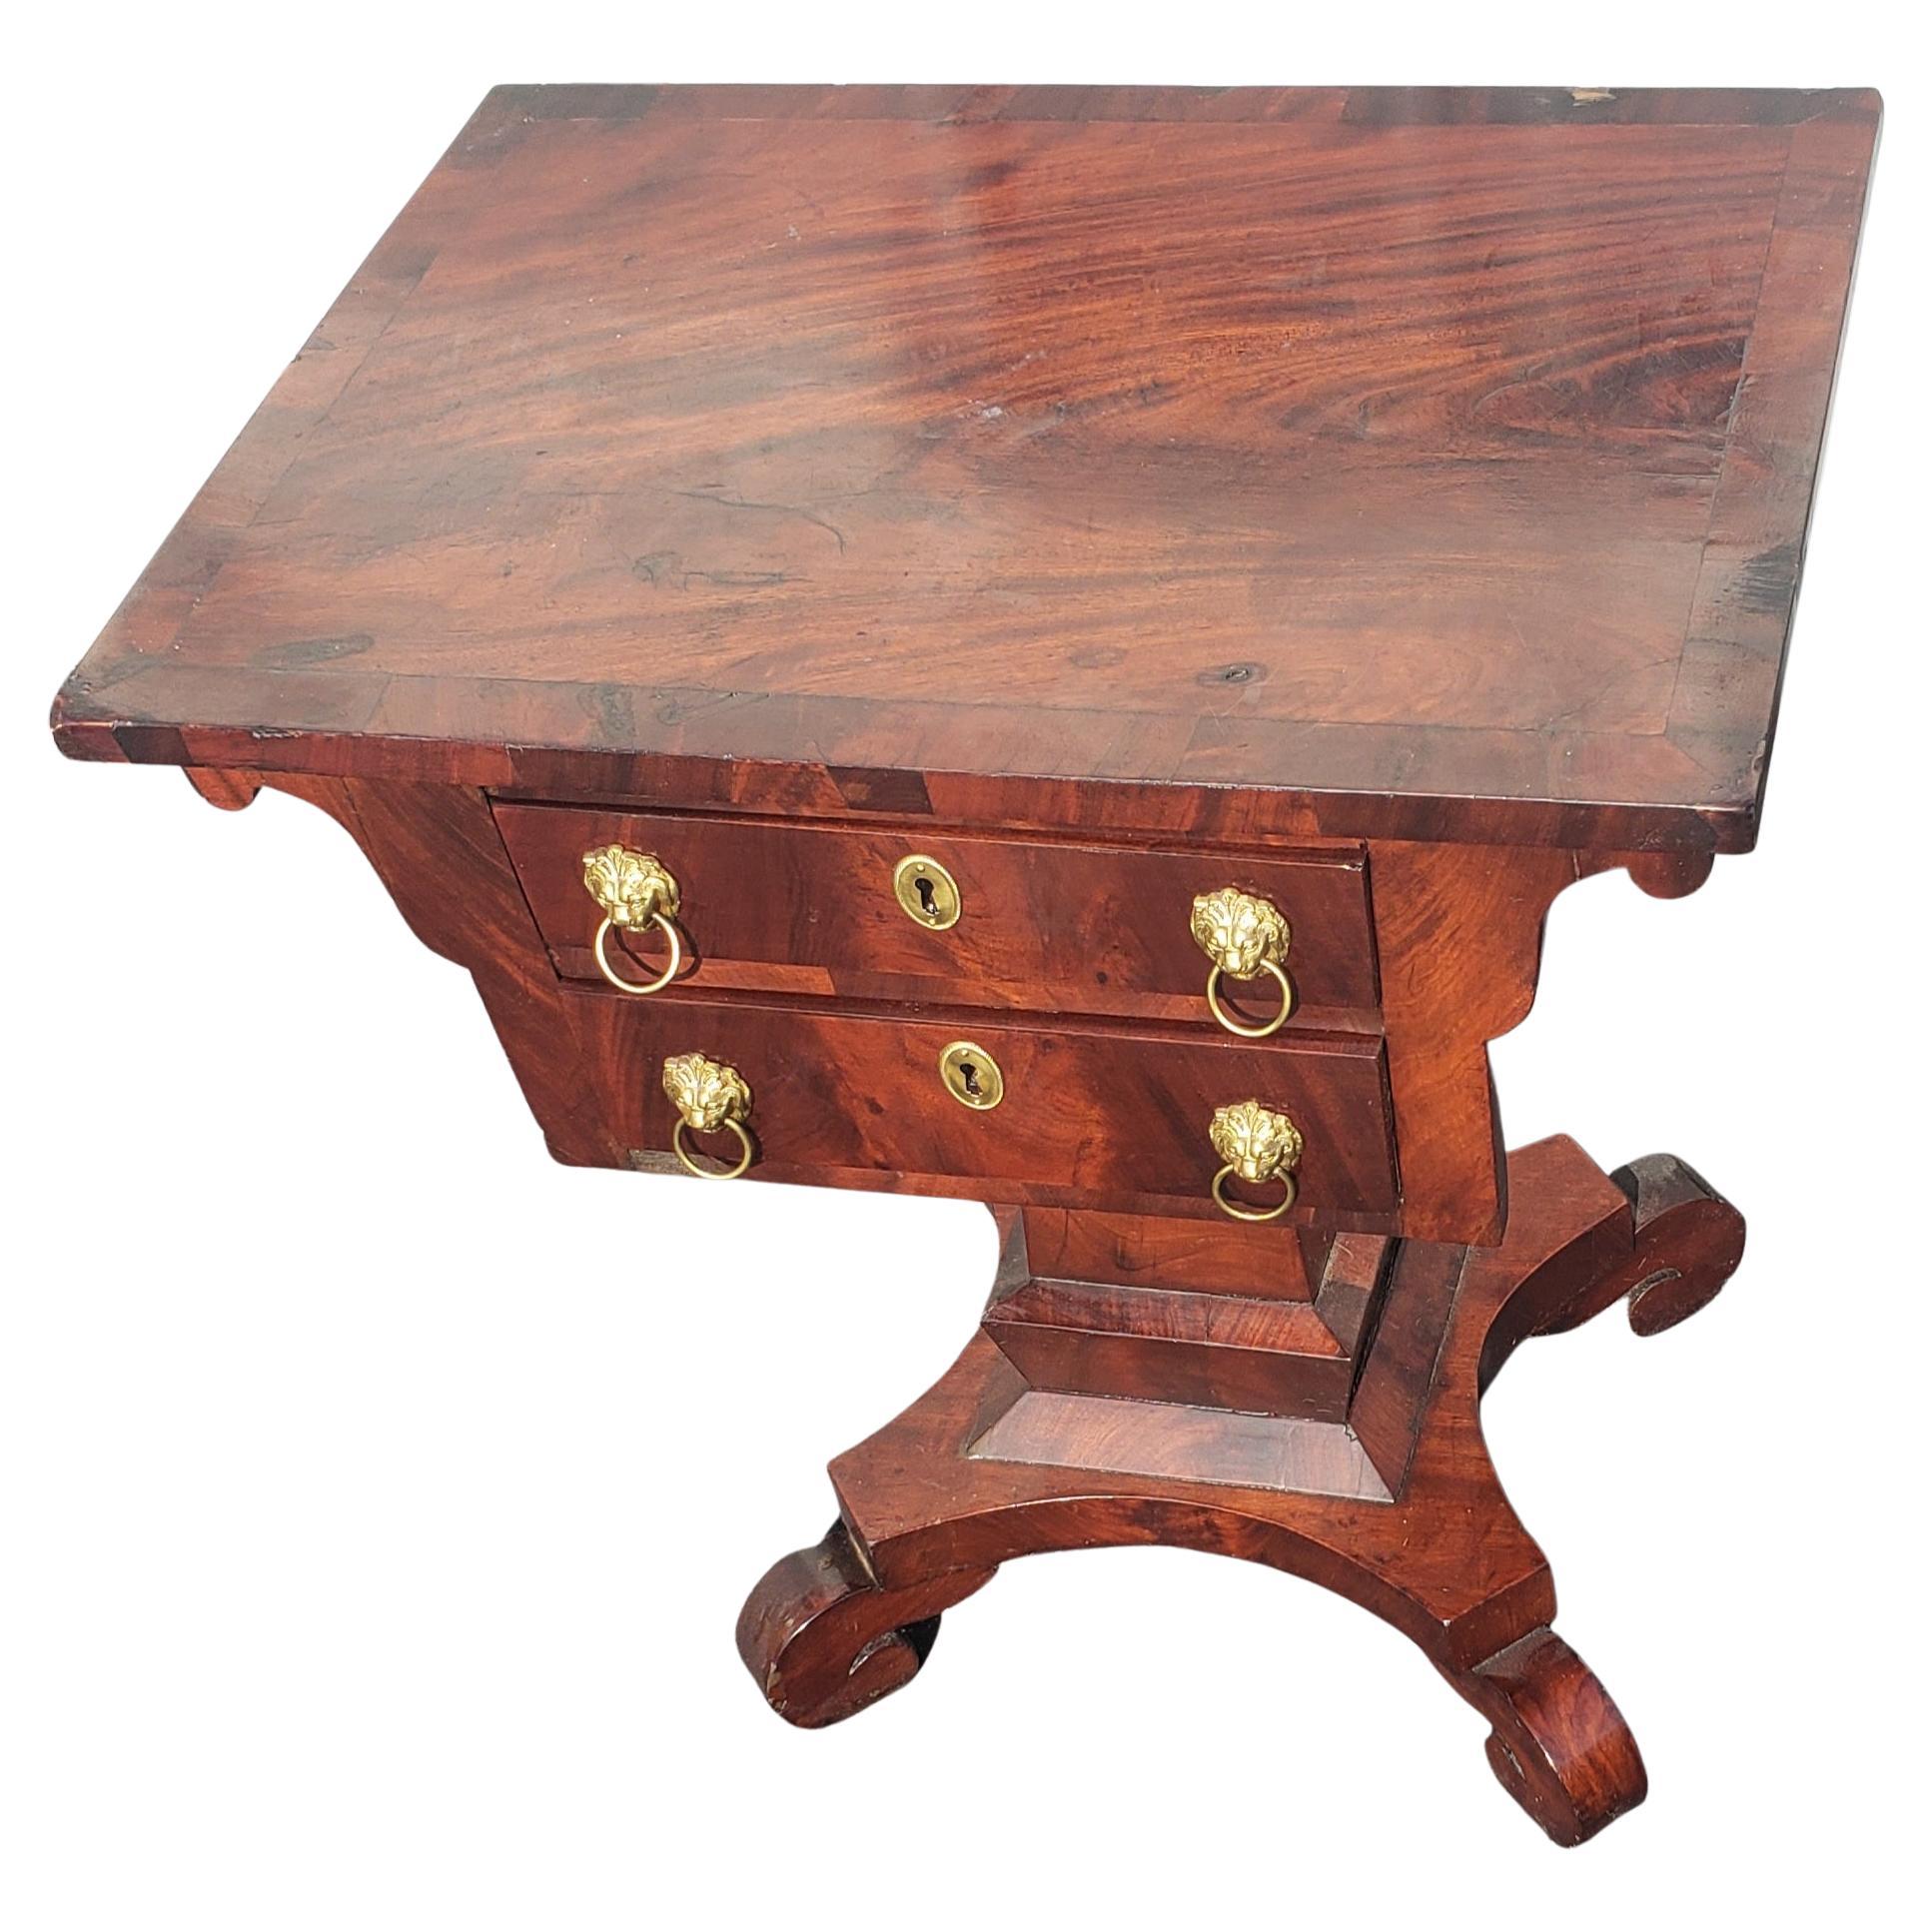 Late 1800s flame mahogany American Empire side table, parlor table, end table. Two functional dovetail drawers. Drop down lion head pulls. Good vintage condition with wear appropriate with age and use.
Measures 22